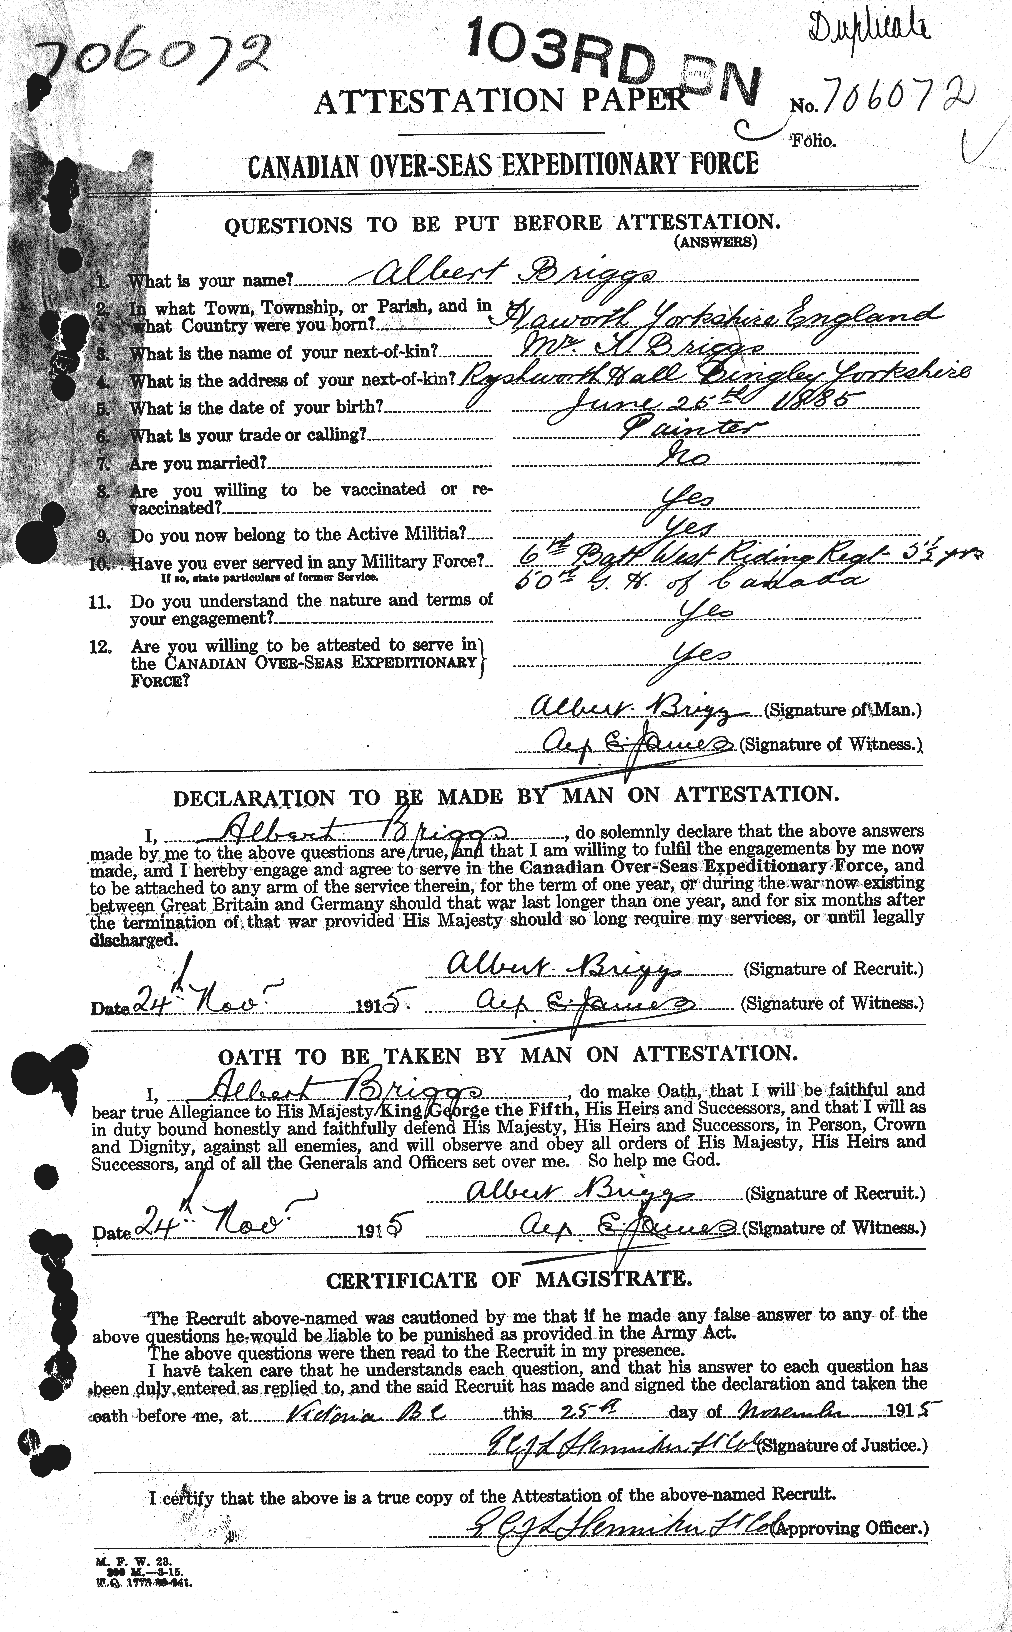 Personnel Records of the First World War - CEF 263952a